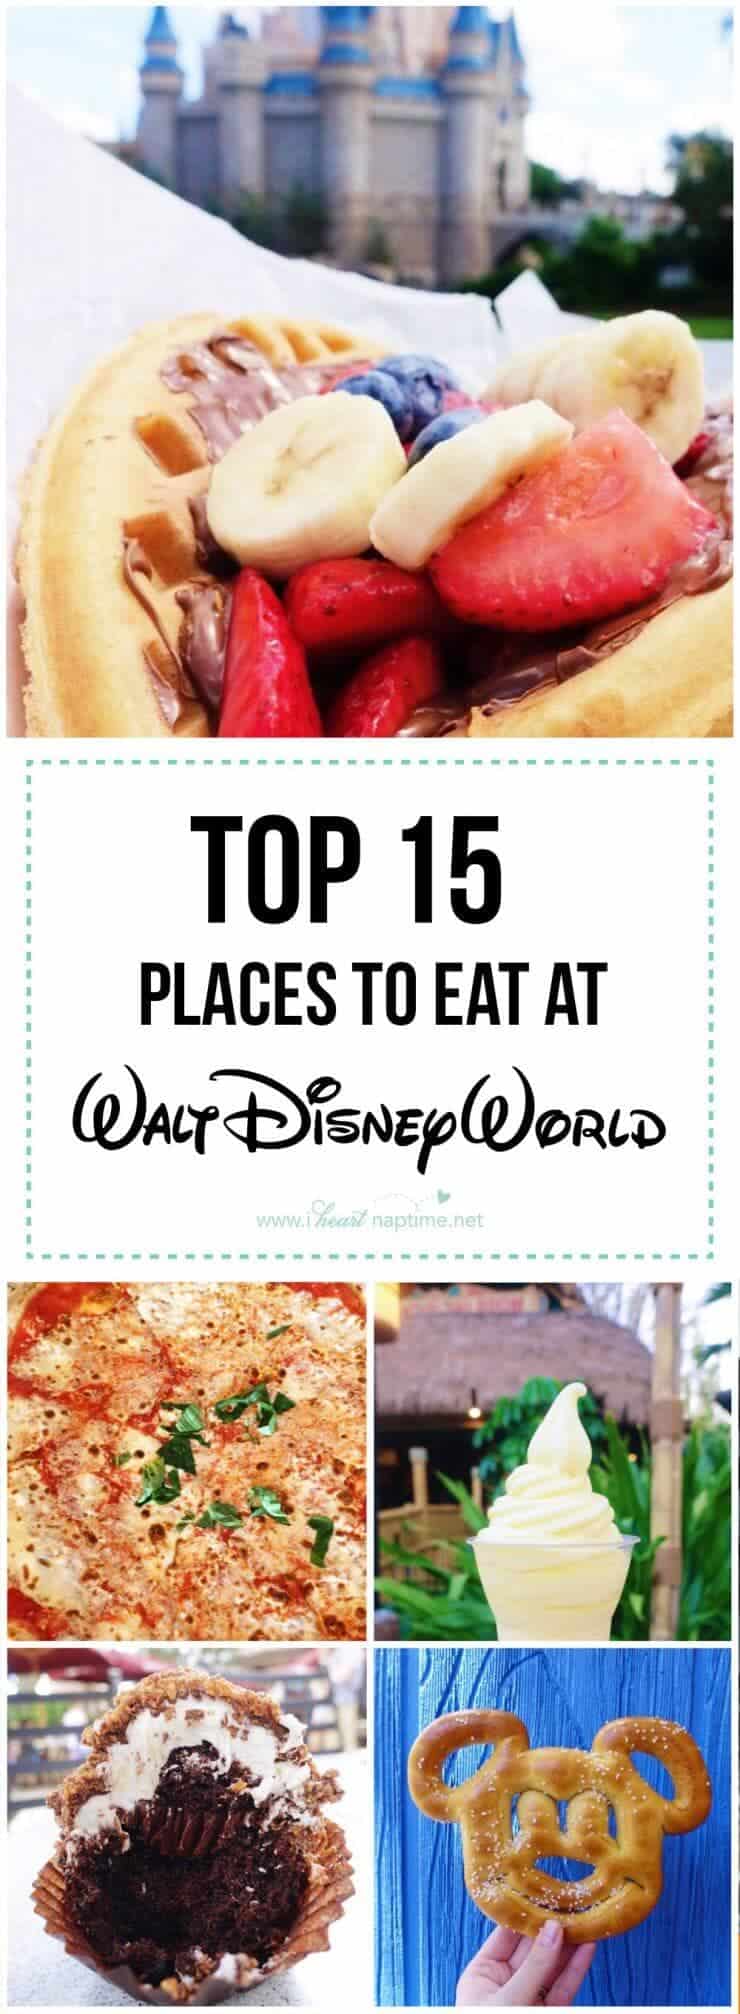 Top 15 places to eat at Walt Disney World -so many delicious place to try the next time you travel to Disney! 